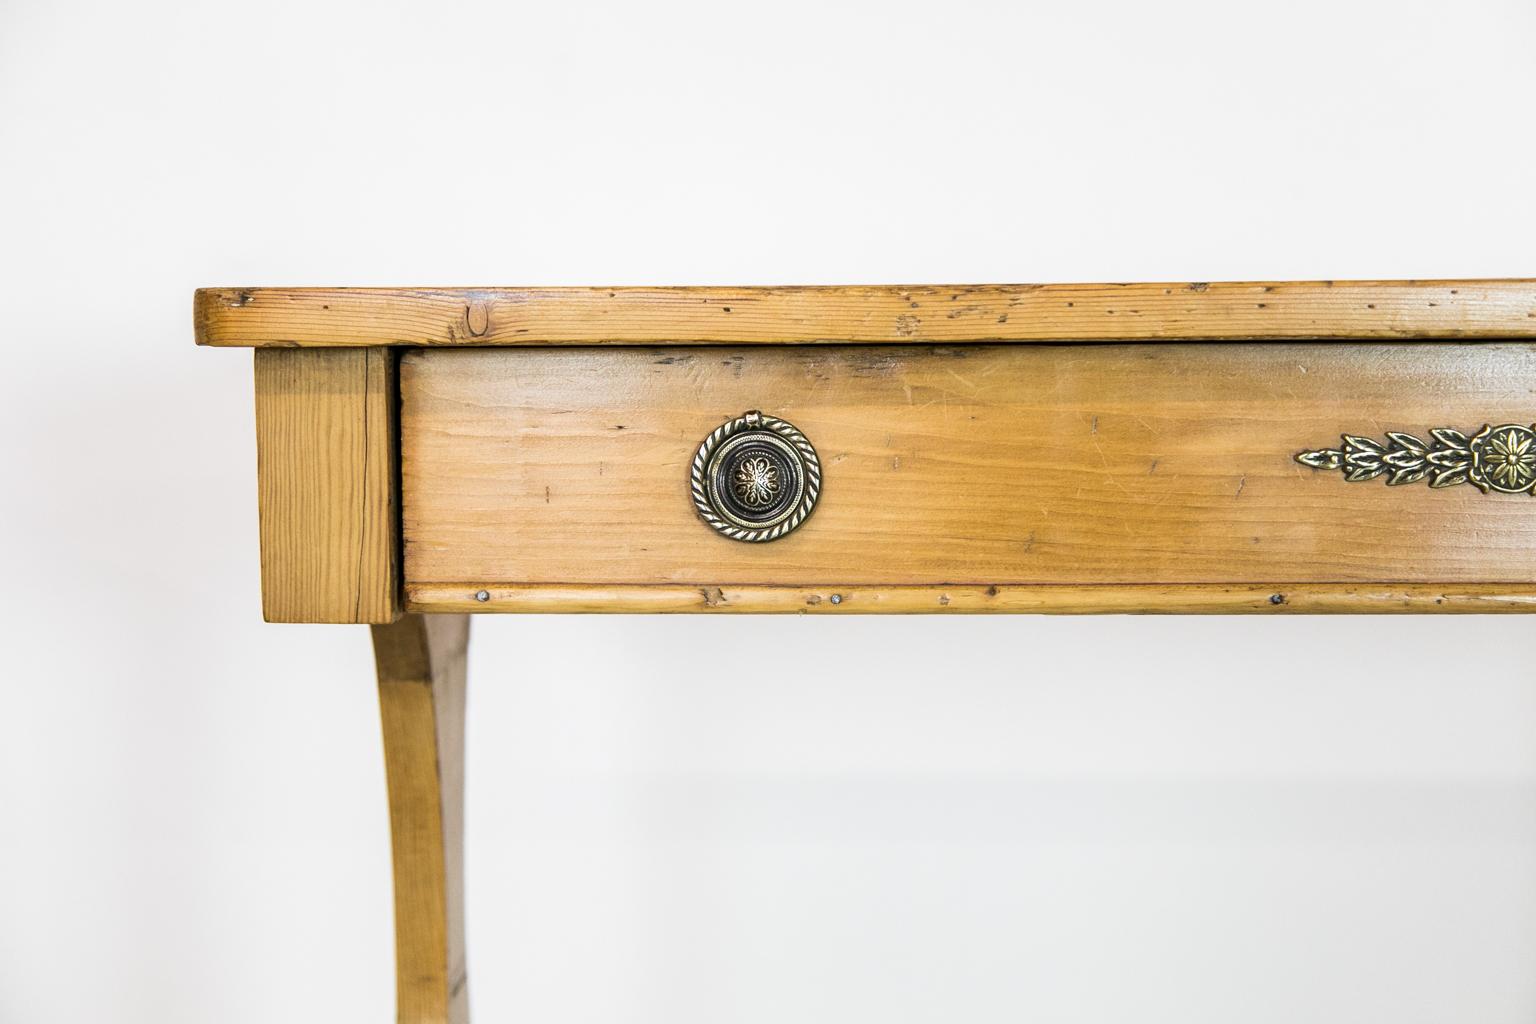 The top of this stretcher table has a weathered patina and a 4 1/2-inch circular mark on the left-hand side. The drawer has an applied bullnose molding on the front of the bottom. The top is supported by a stylize trestle base supported by a turn